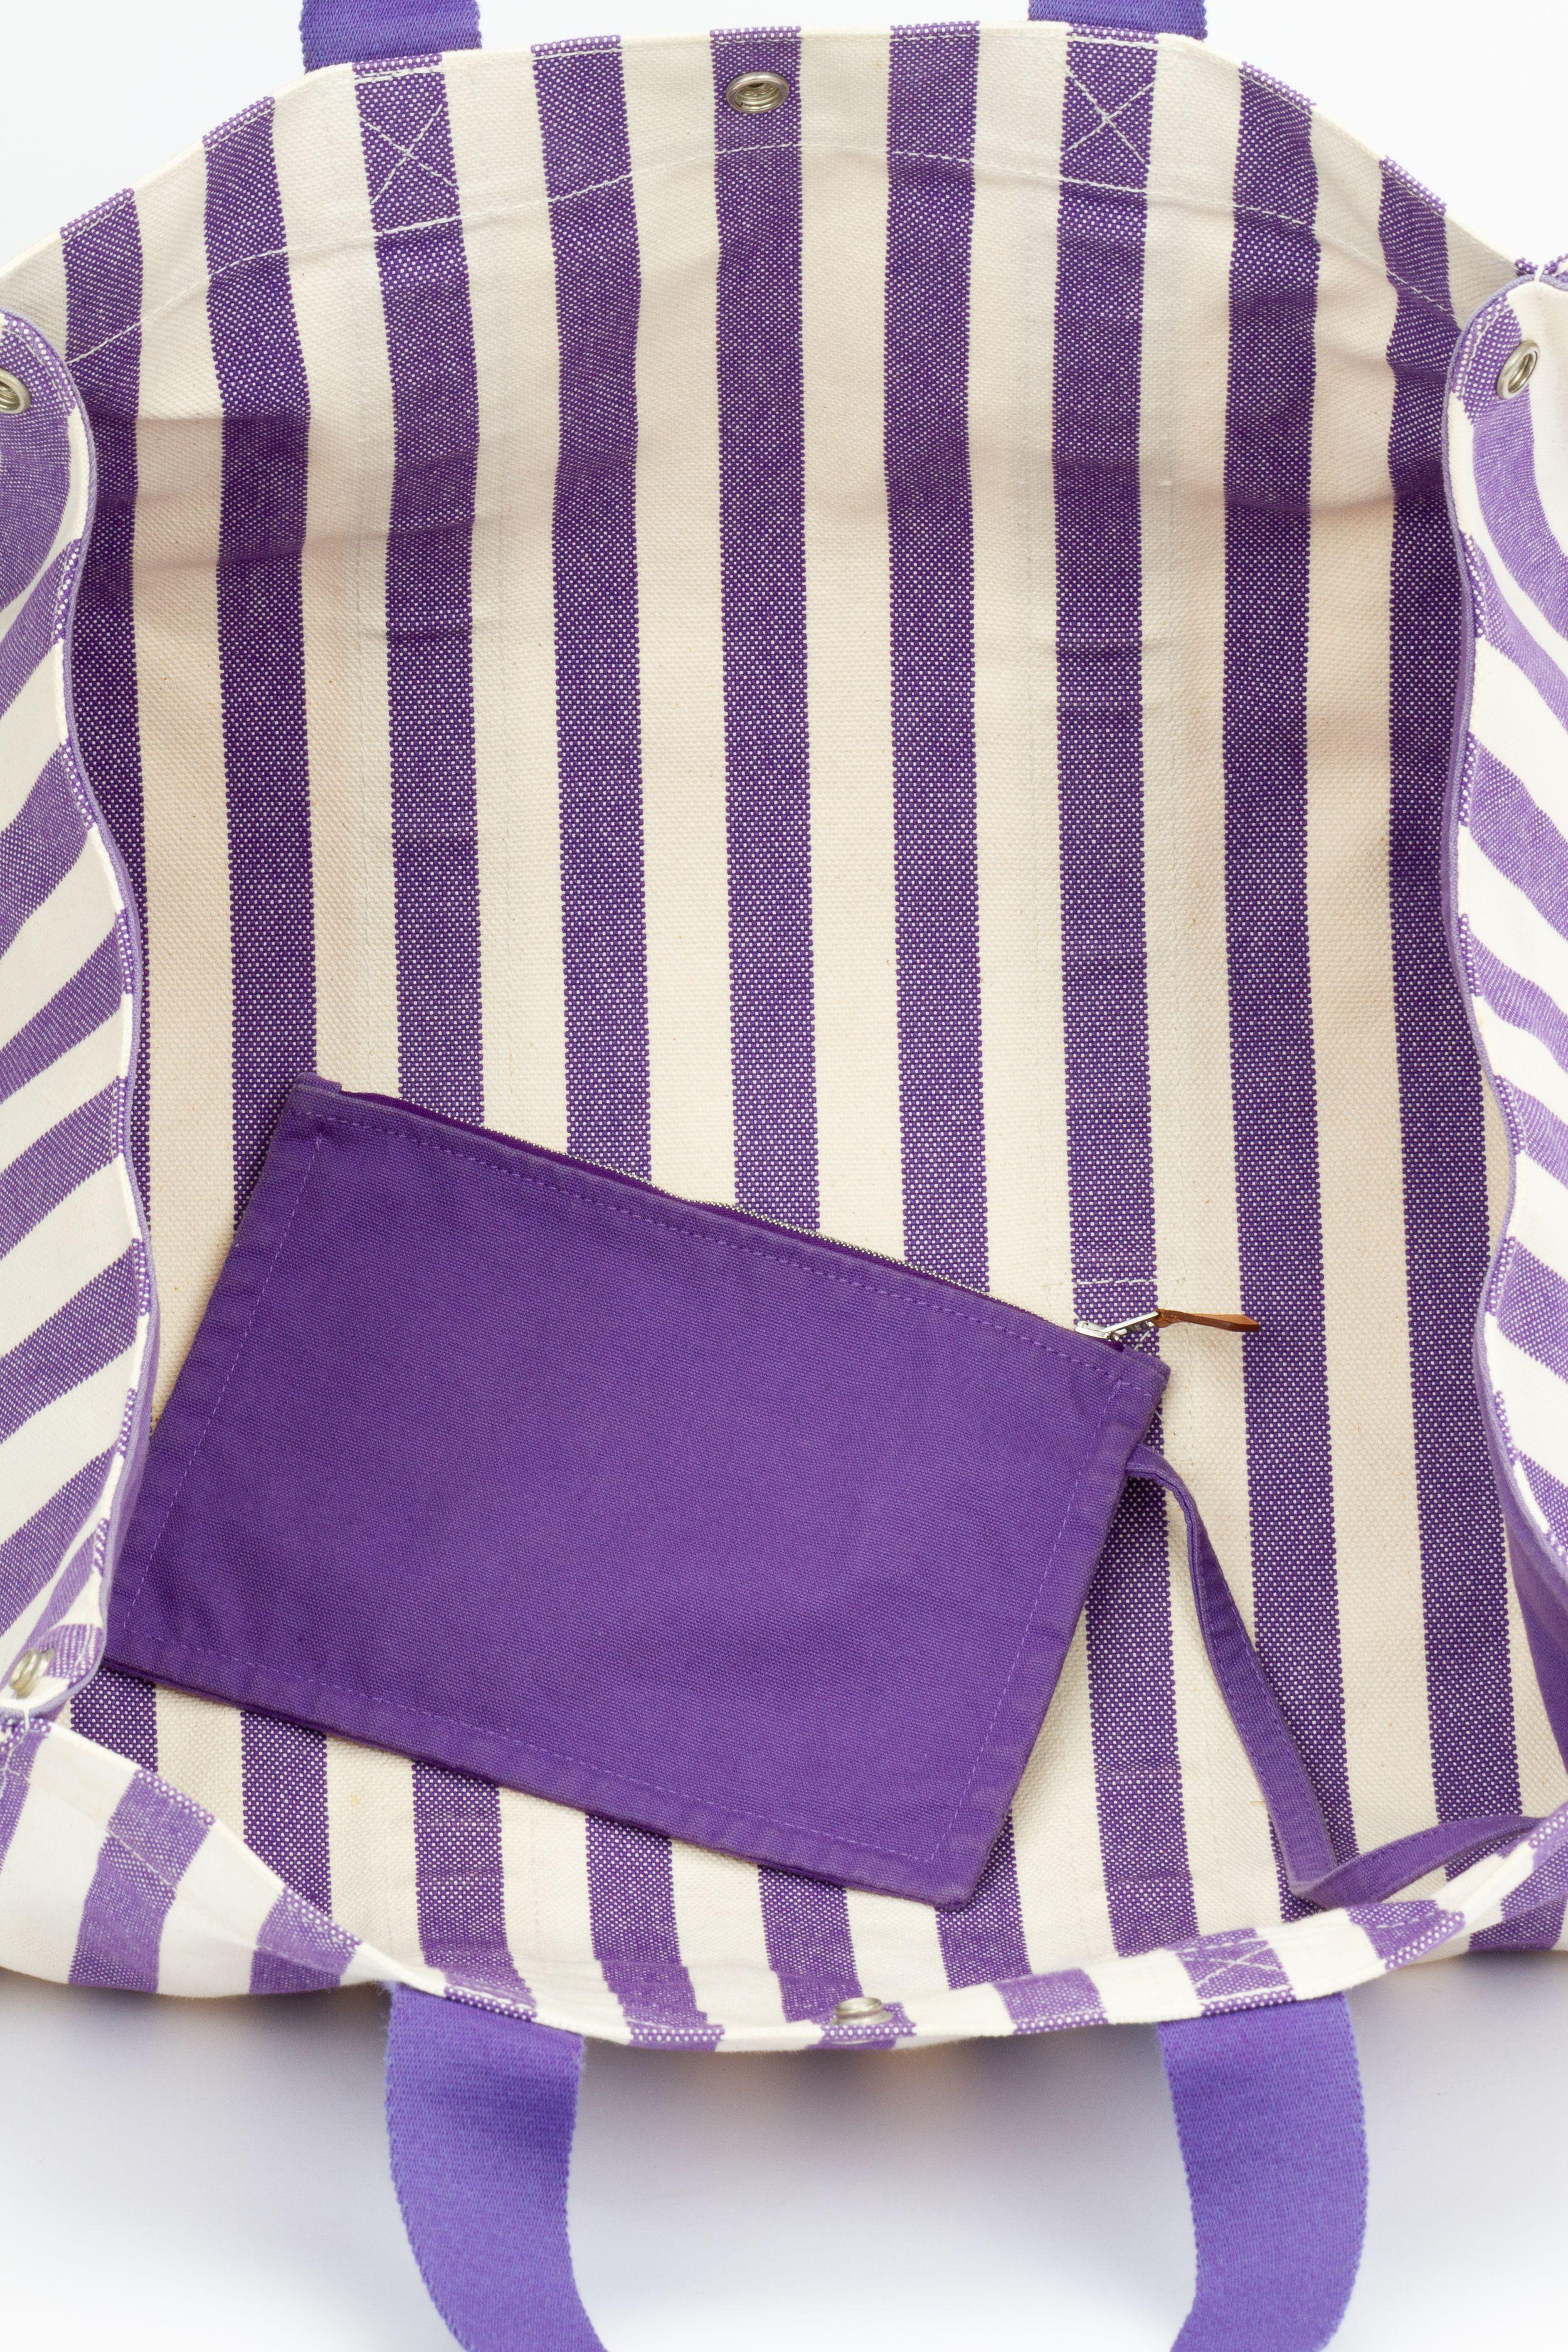 Hermès Purple Striped Beach Bag In Excellent Condition For Sale In West Hollywood, CA